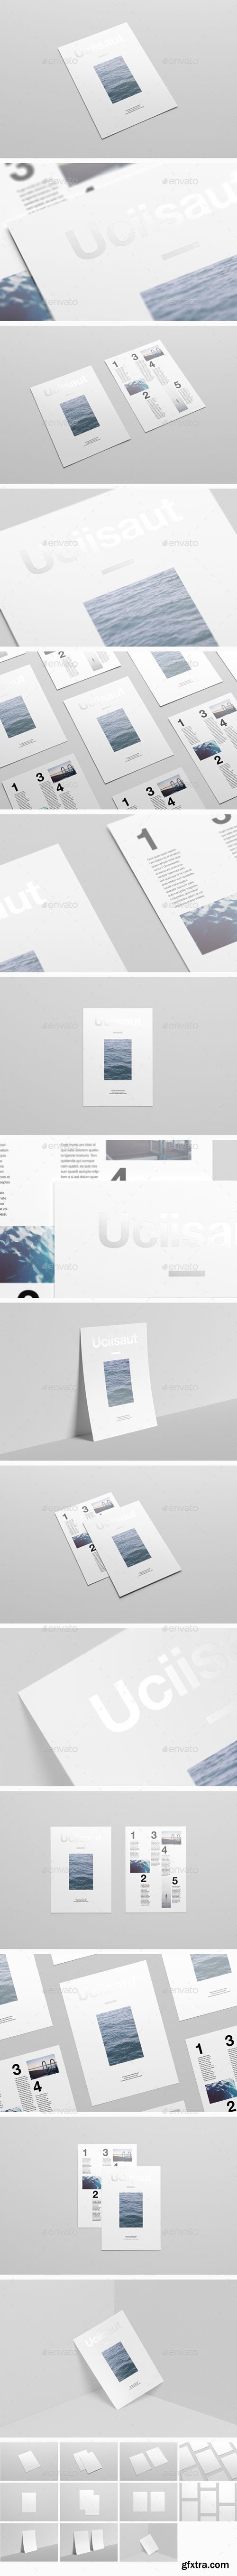 GraphicRiver - A4 Flyer Mock-Up 11454795